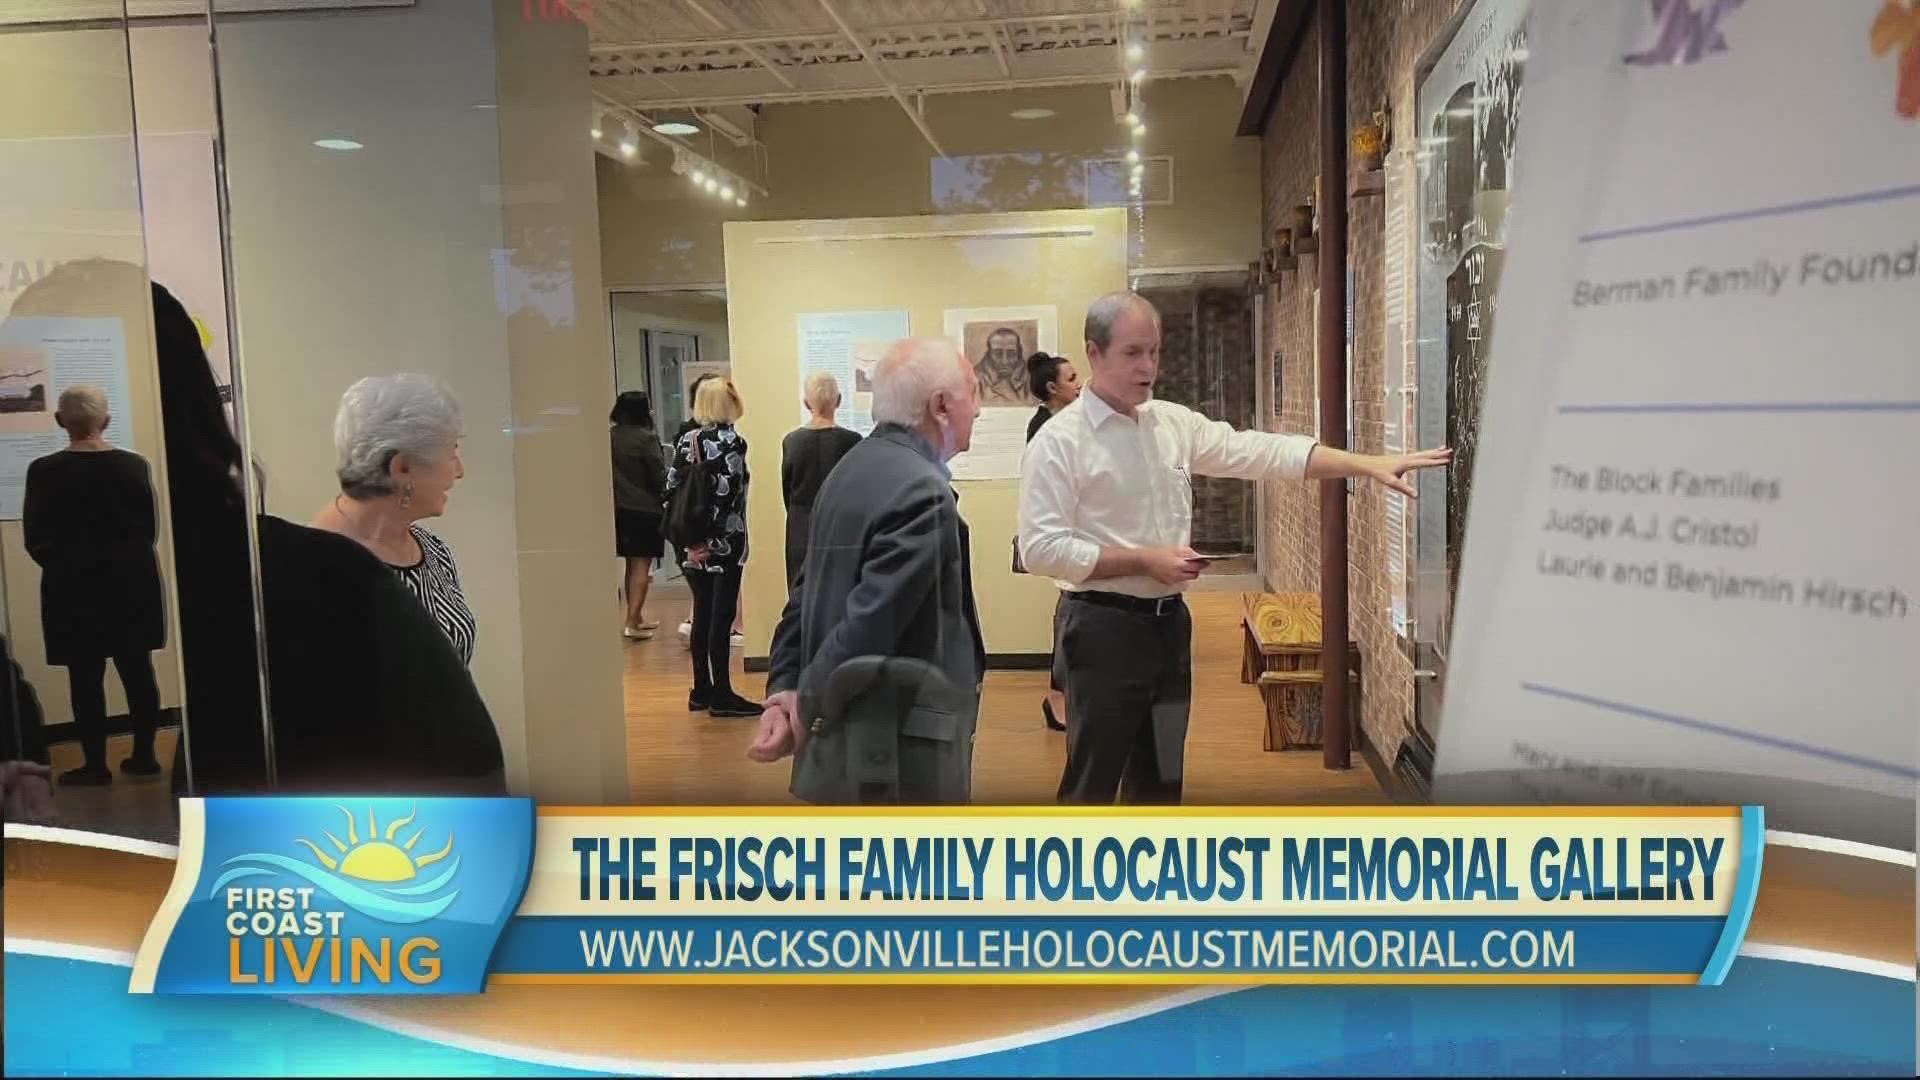 The Frisch Family Holocaust Memorial Gallery features exhibitions, public programs & educational tours exploring human rights, individual courage, and finding peace.